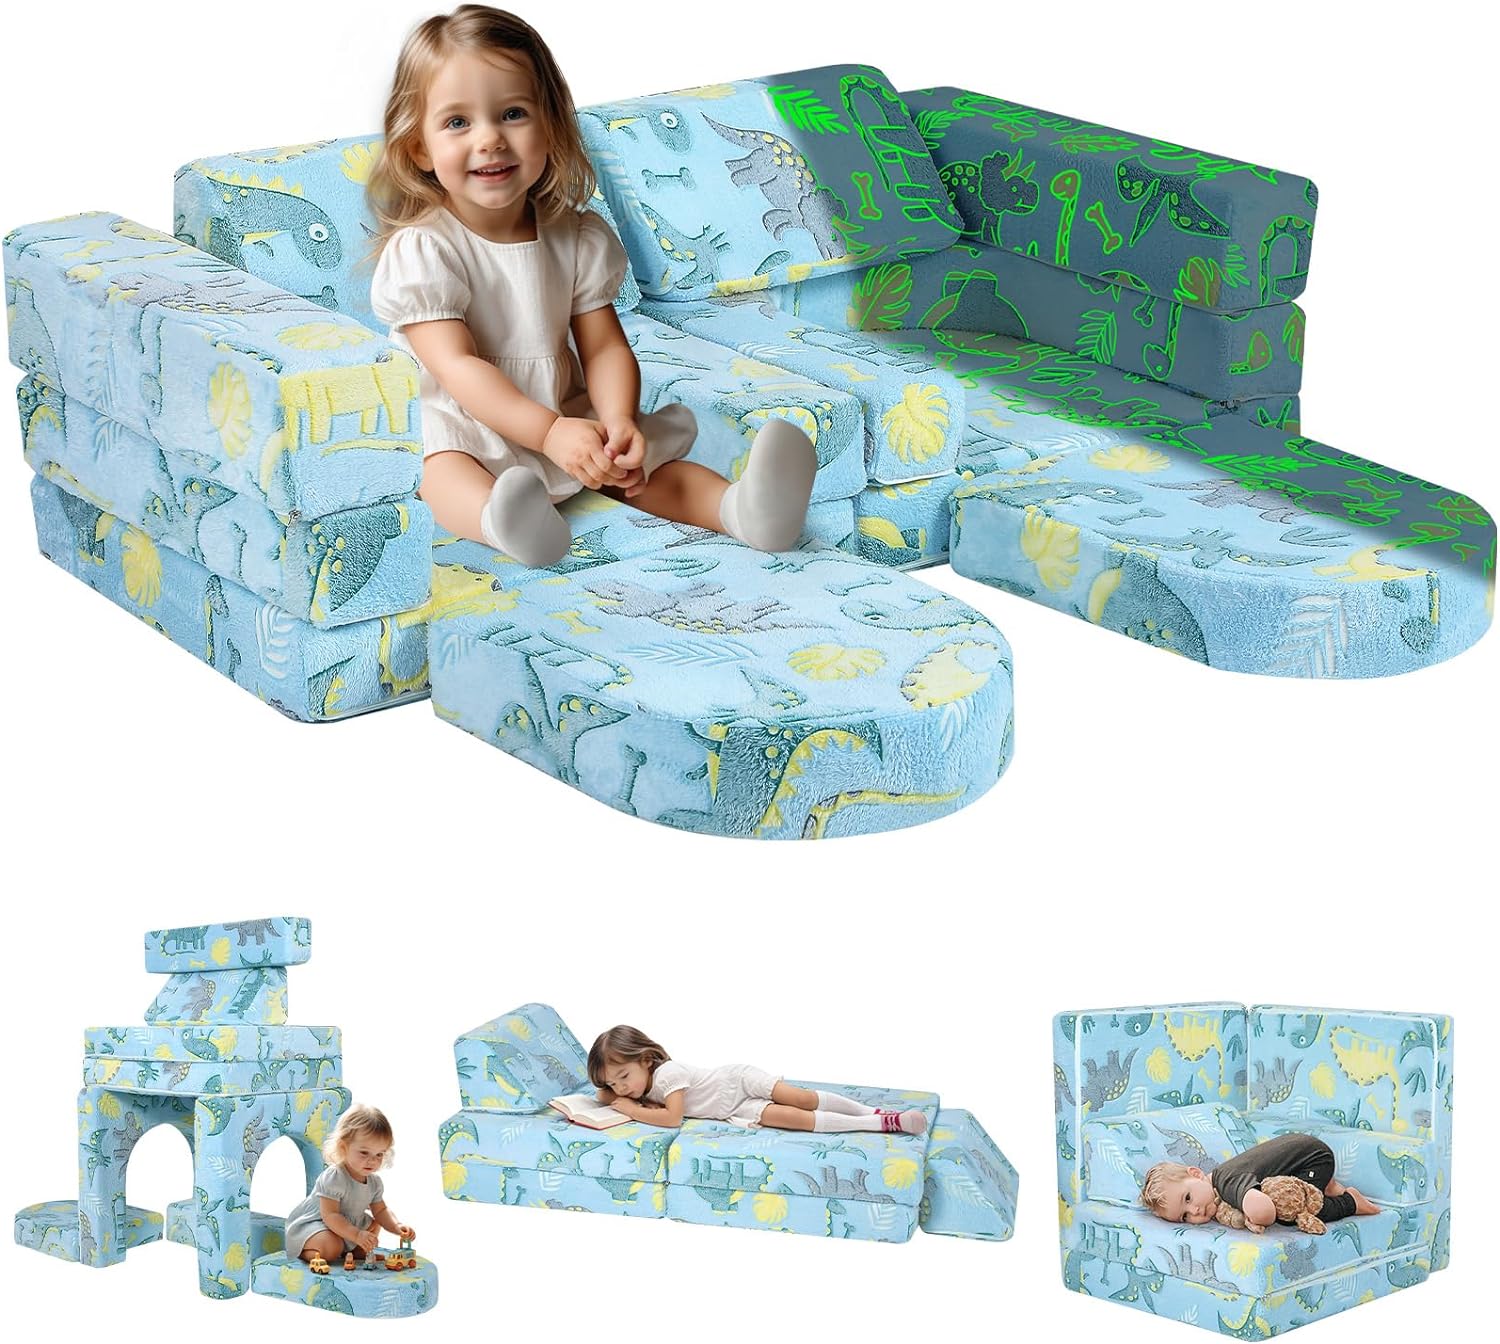 MeMoreCool 10-Piece Couch Sofa, Modular Toddler Glow Sofa for Playroom Bedroom, Fold Out Play Couch for Kid Girl Boy, Sectional Foam Playset Couch Set, Blue Dino